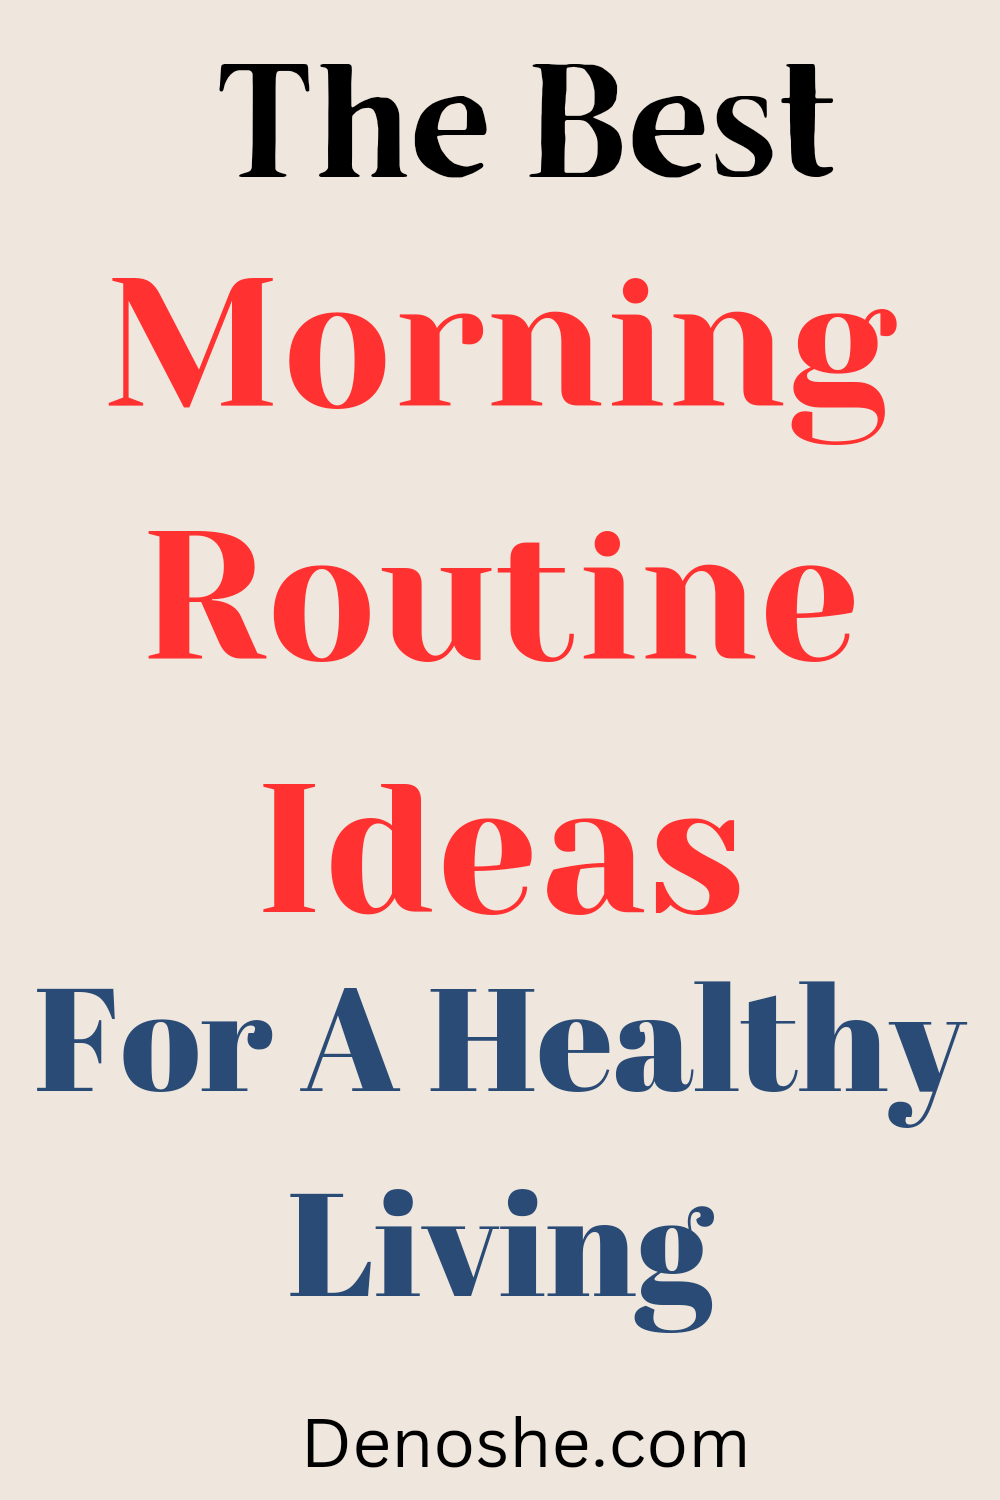 come with me as I dish it out in detail. Morning routine ideas